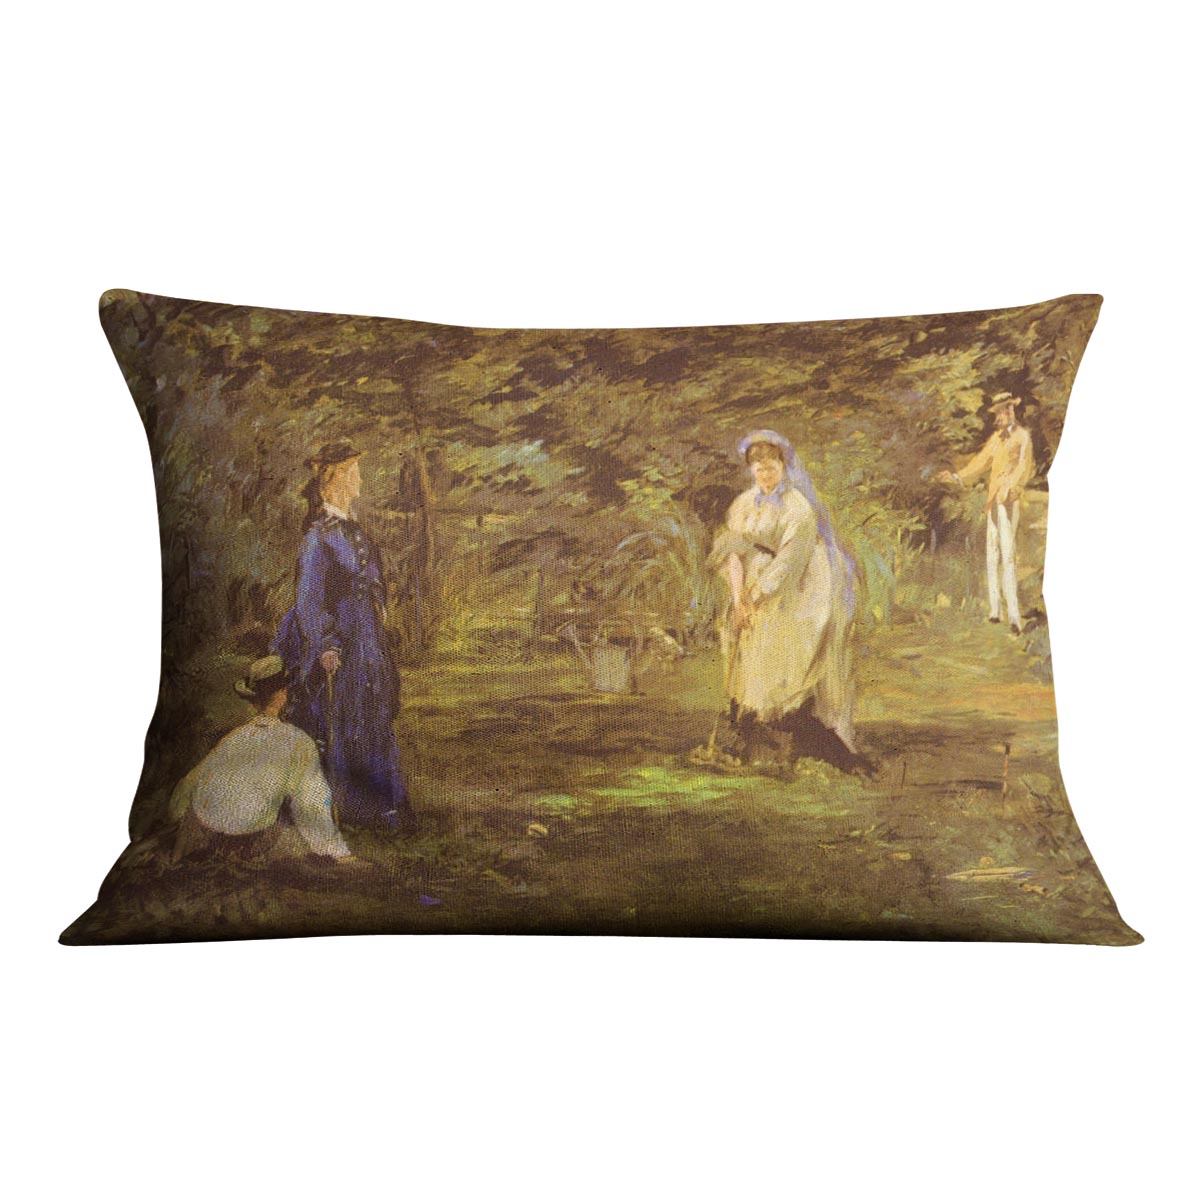 Croquet Party by Manet Cushion